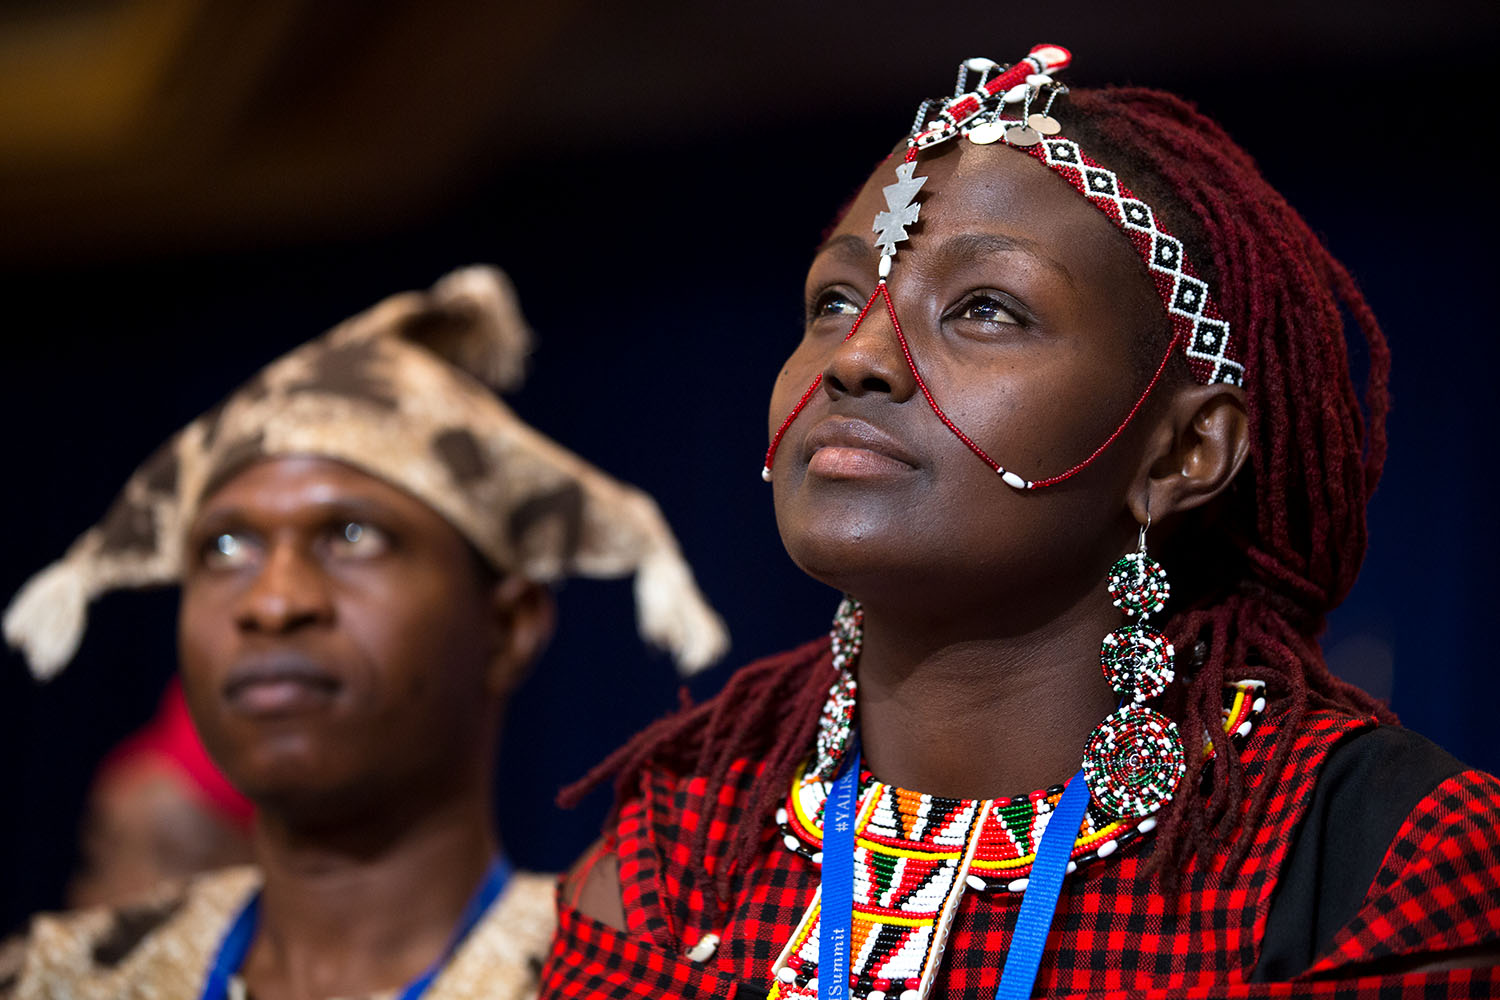 Josephine Kulea (Kenya) and audience members listen as President Barack Obama delivers remarks during a Young African Leaders Initiative (YALI) town hall in Washington, D.C., July 28, 2014. (Official White House Photo by Pete Souza)